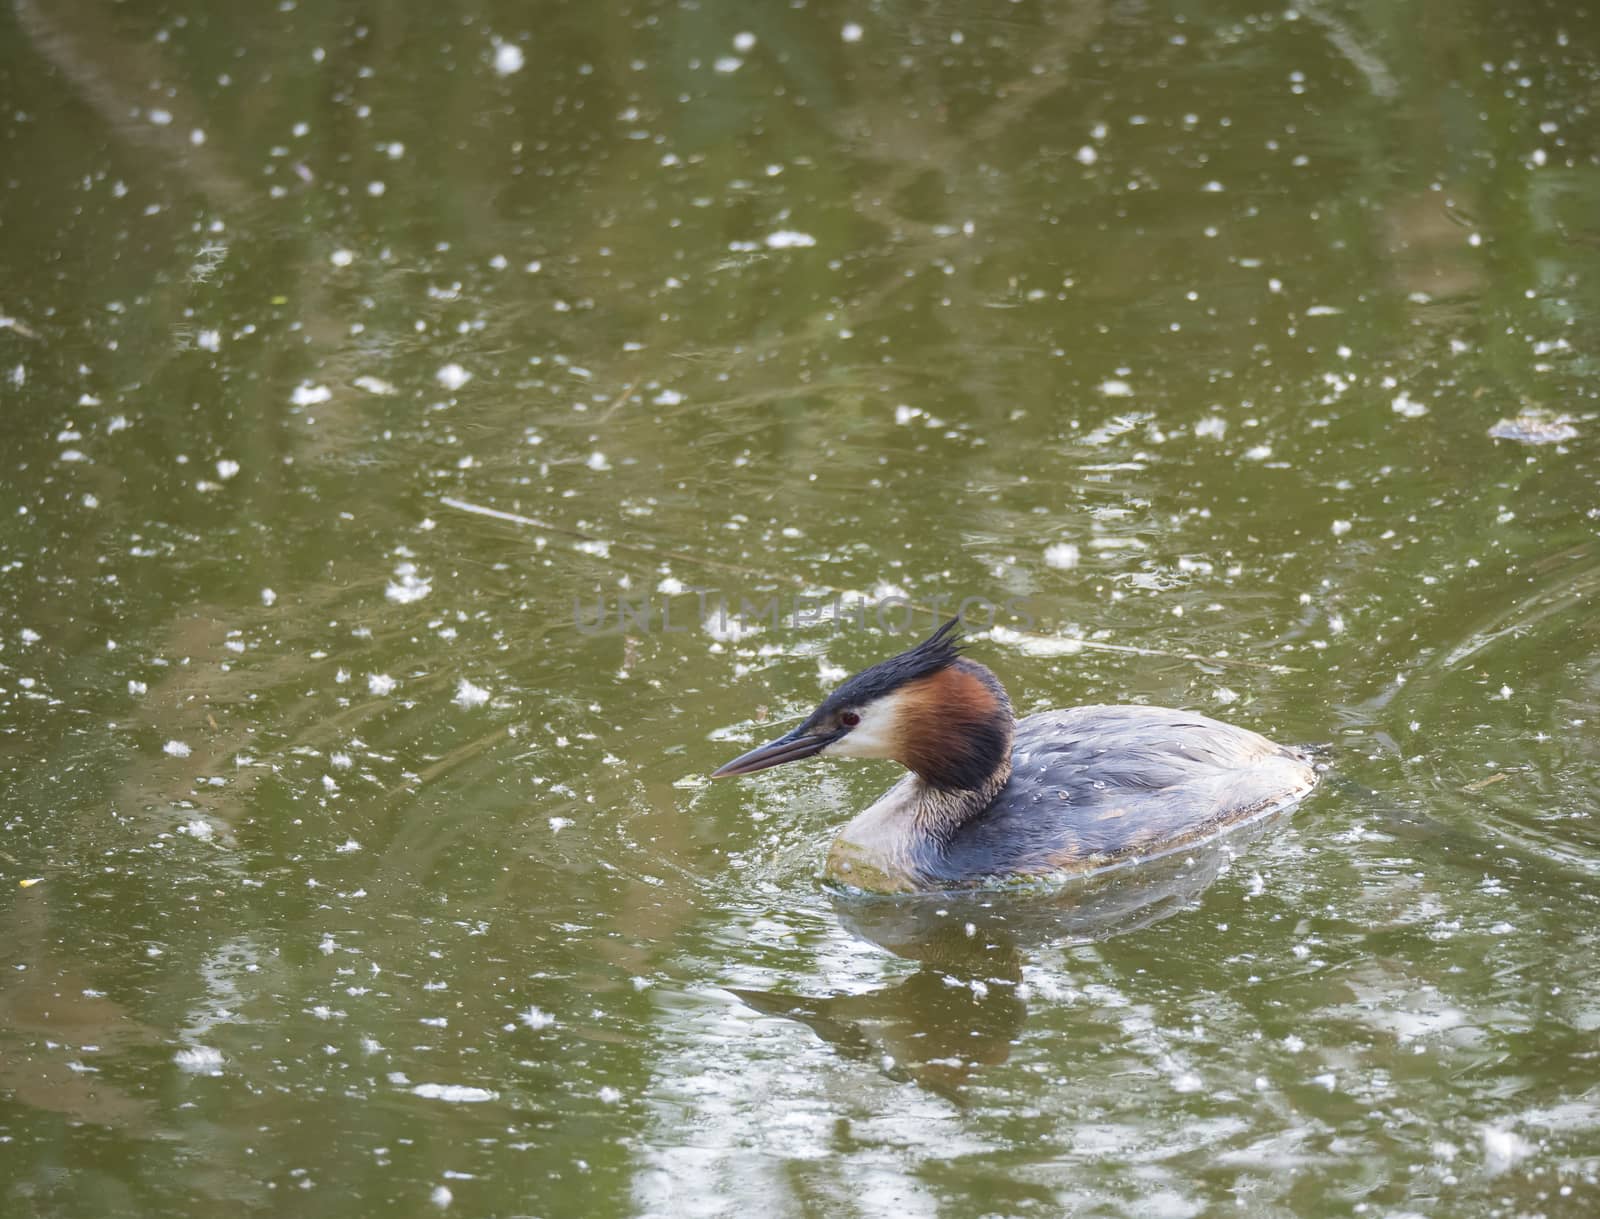 close up great crested grebe, Podiceps cristatus swimming on clear green lake, copy space. by Henkeova